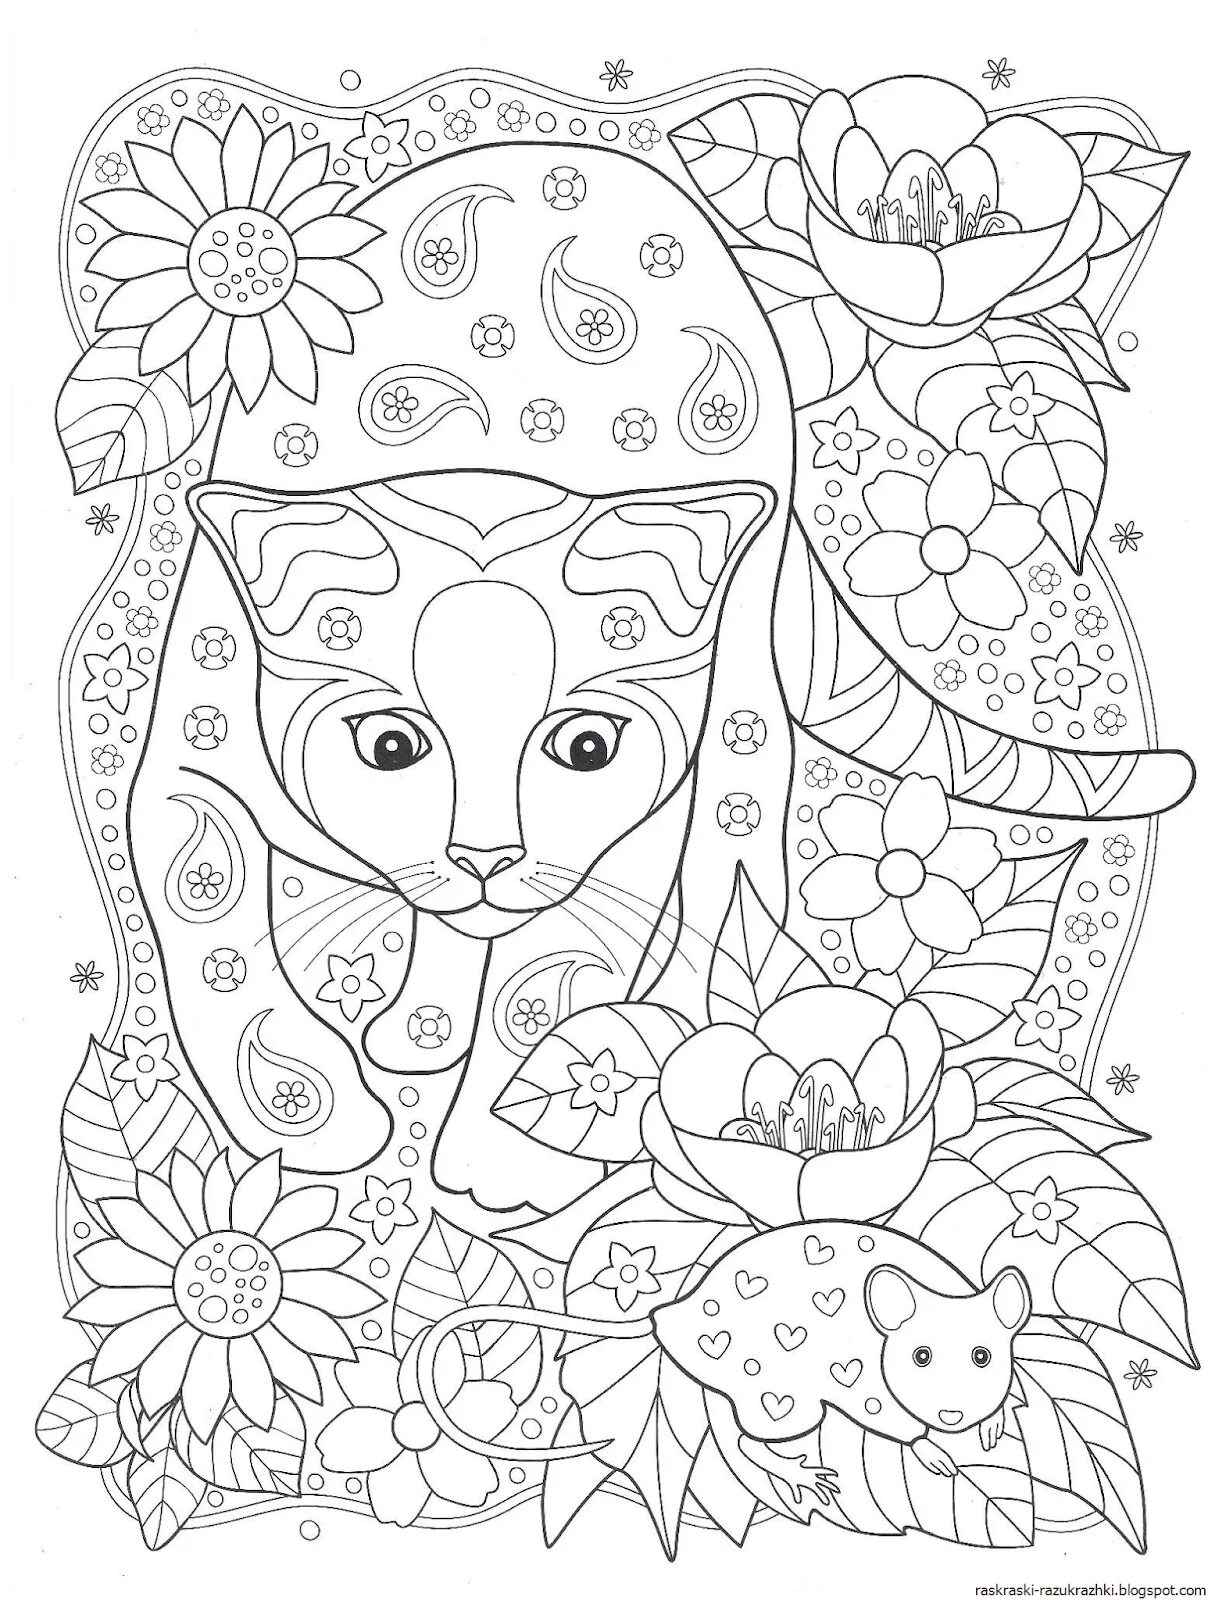 Calm anti-stress animal coloring for kids